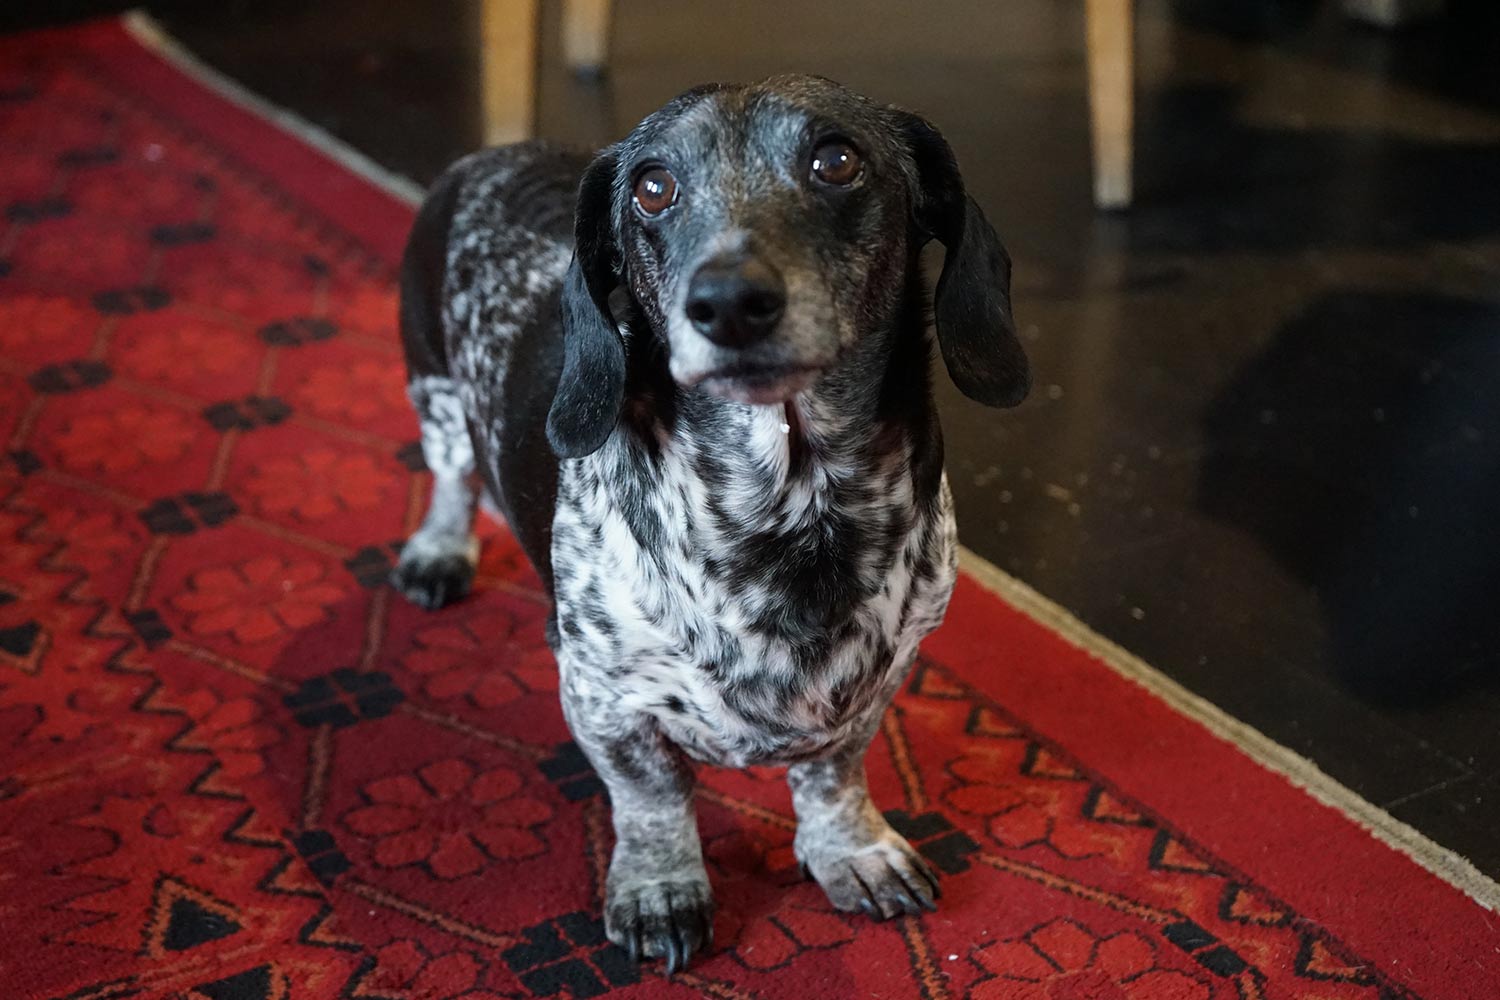 Close-up of a 15-year-old oreo speckled dachshund